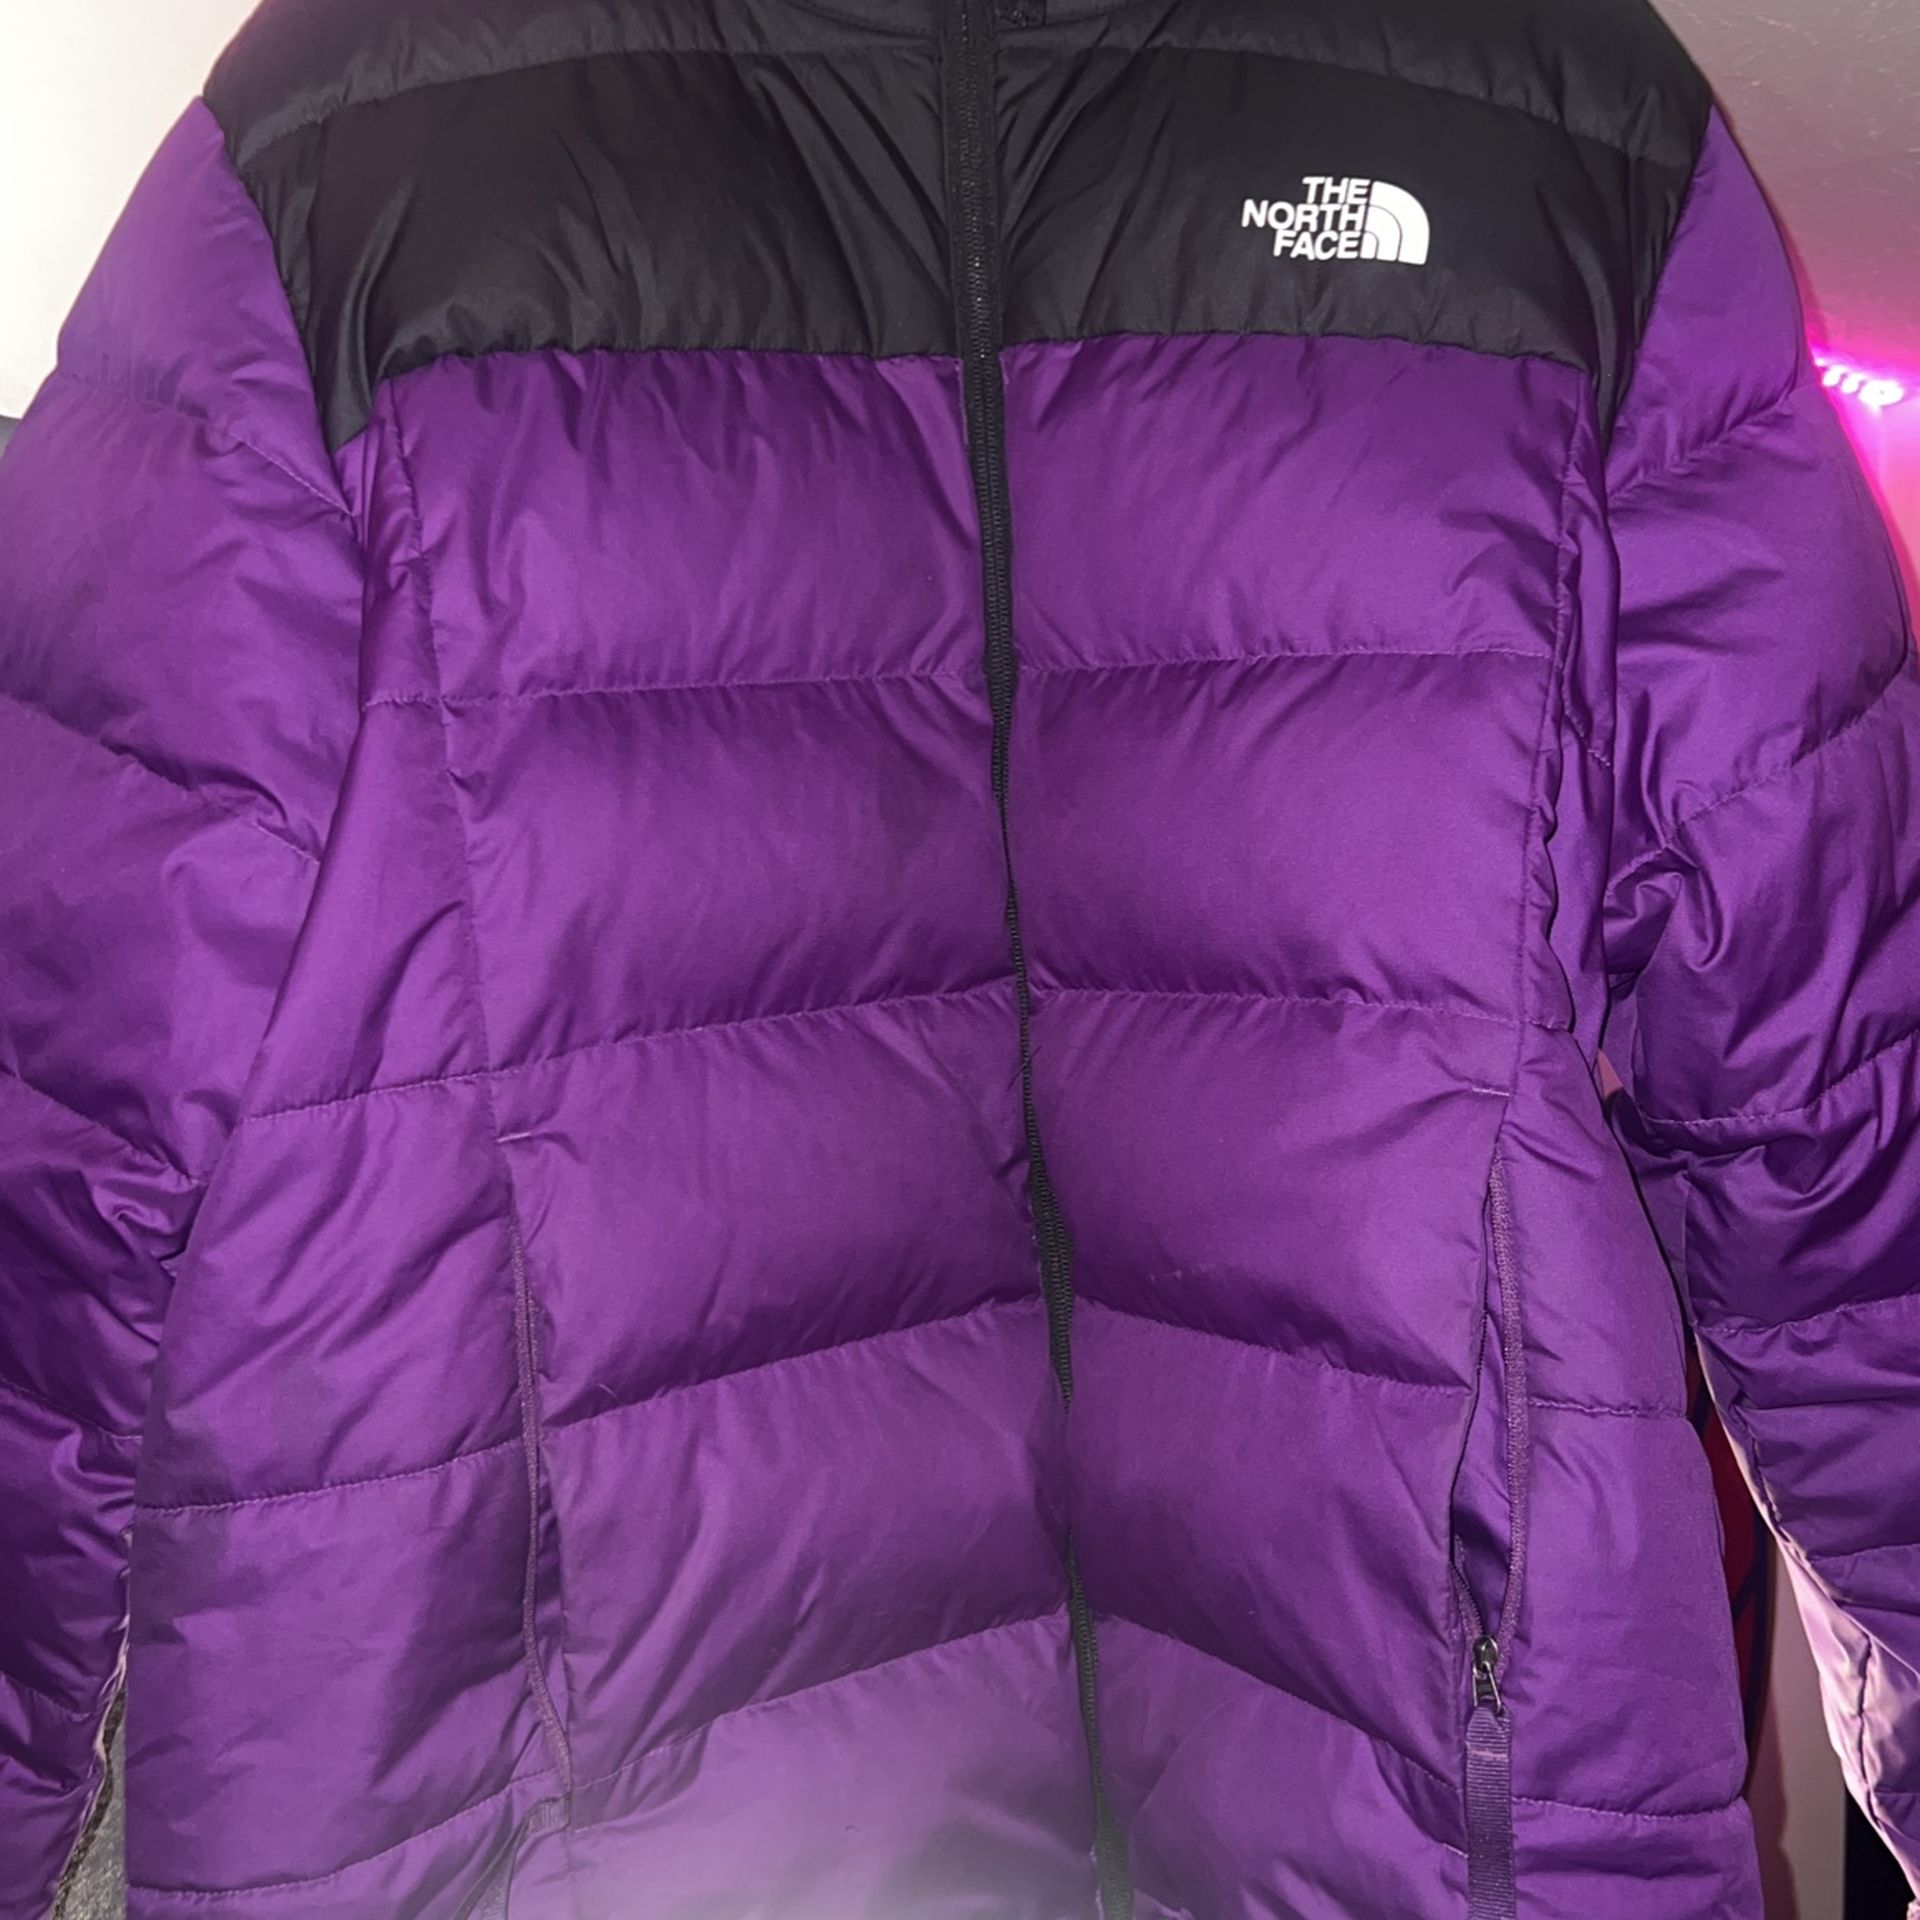 north face puffer jacket